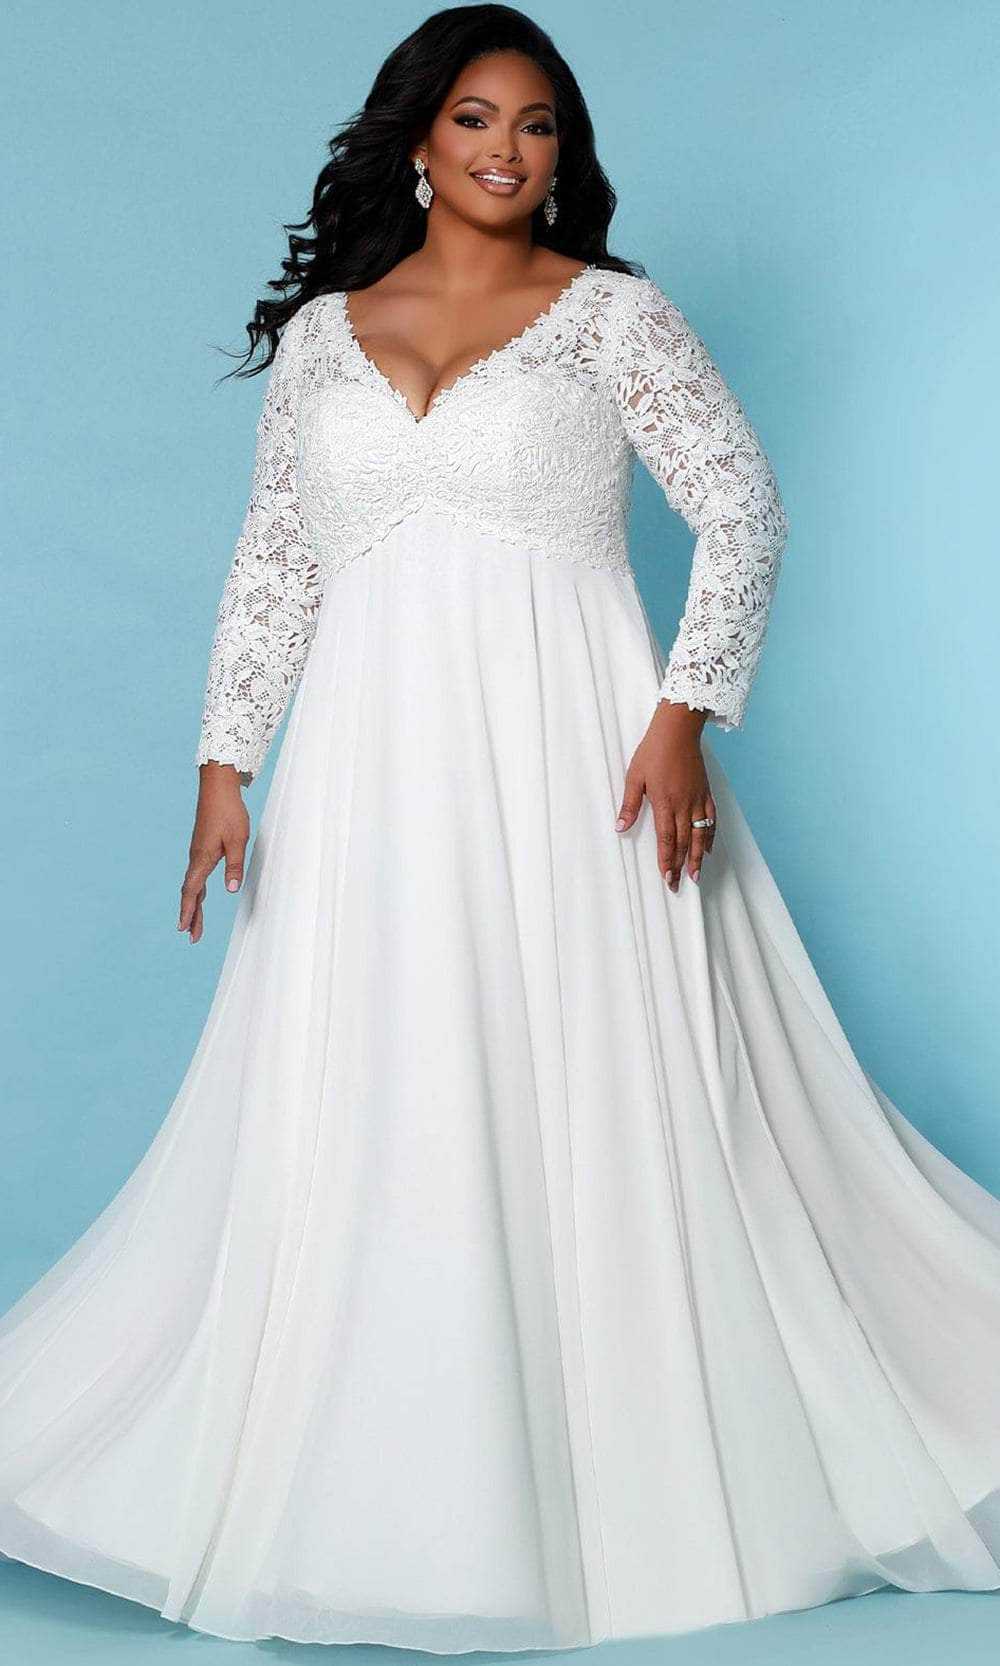 Sydney's Closet Bridal, Sydney's Closet Bridal - SC5276 Lace Empire Bridal Gown